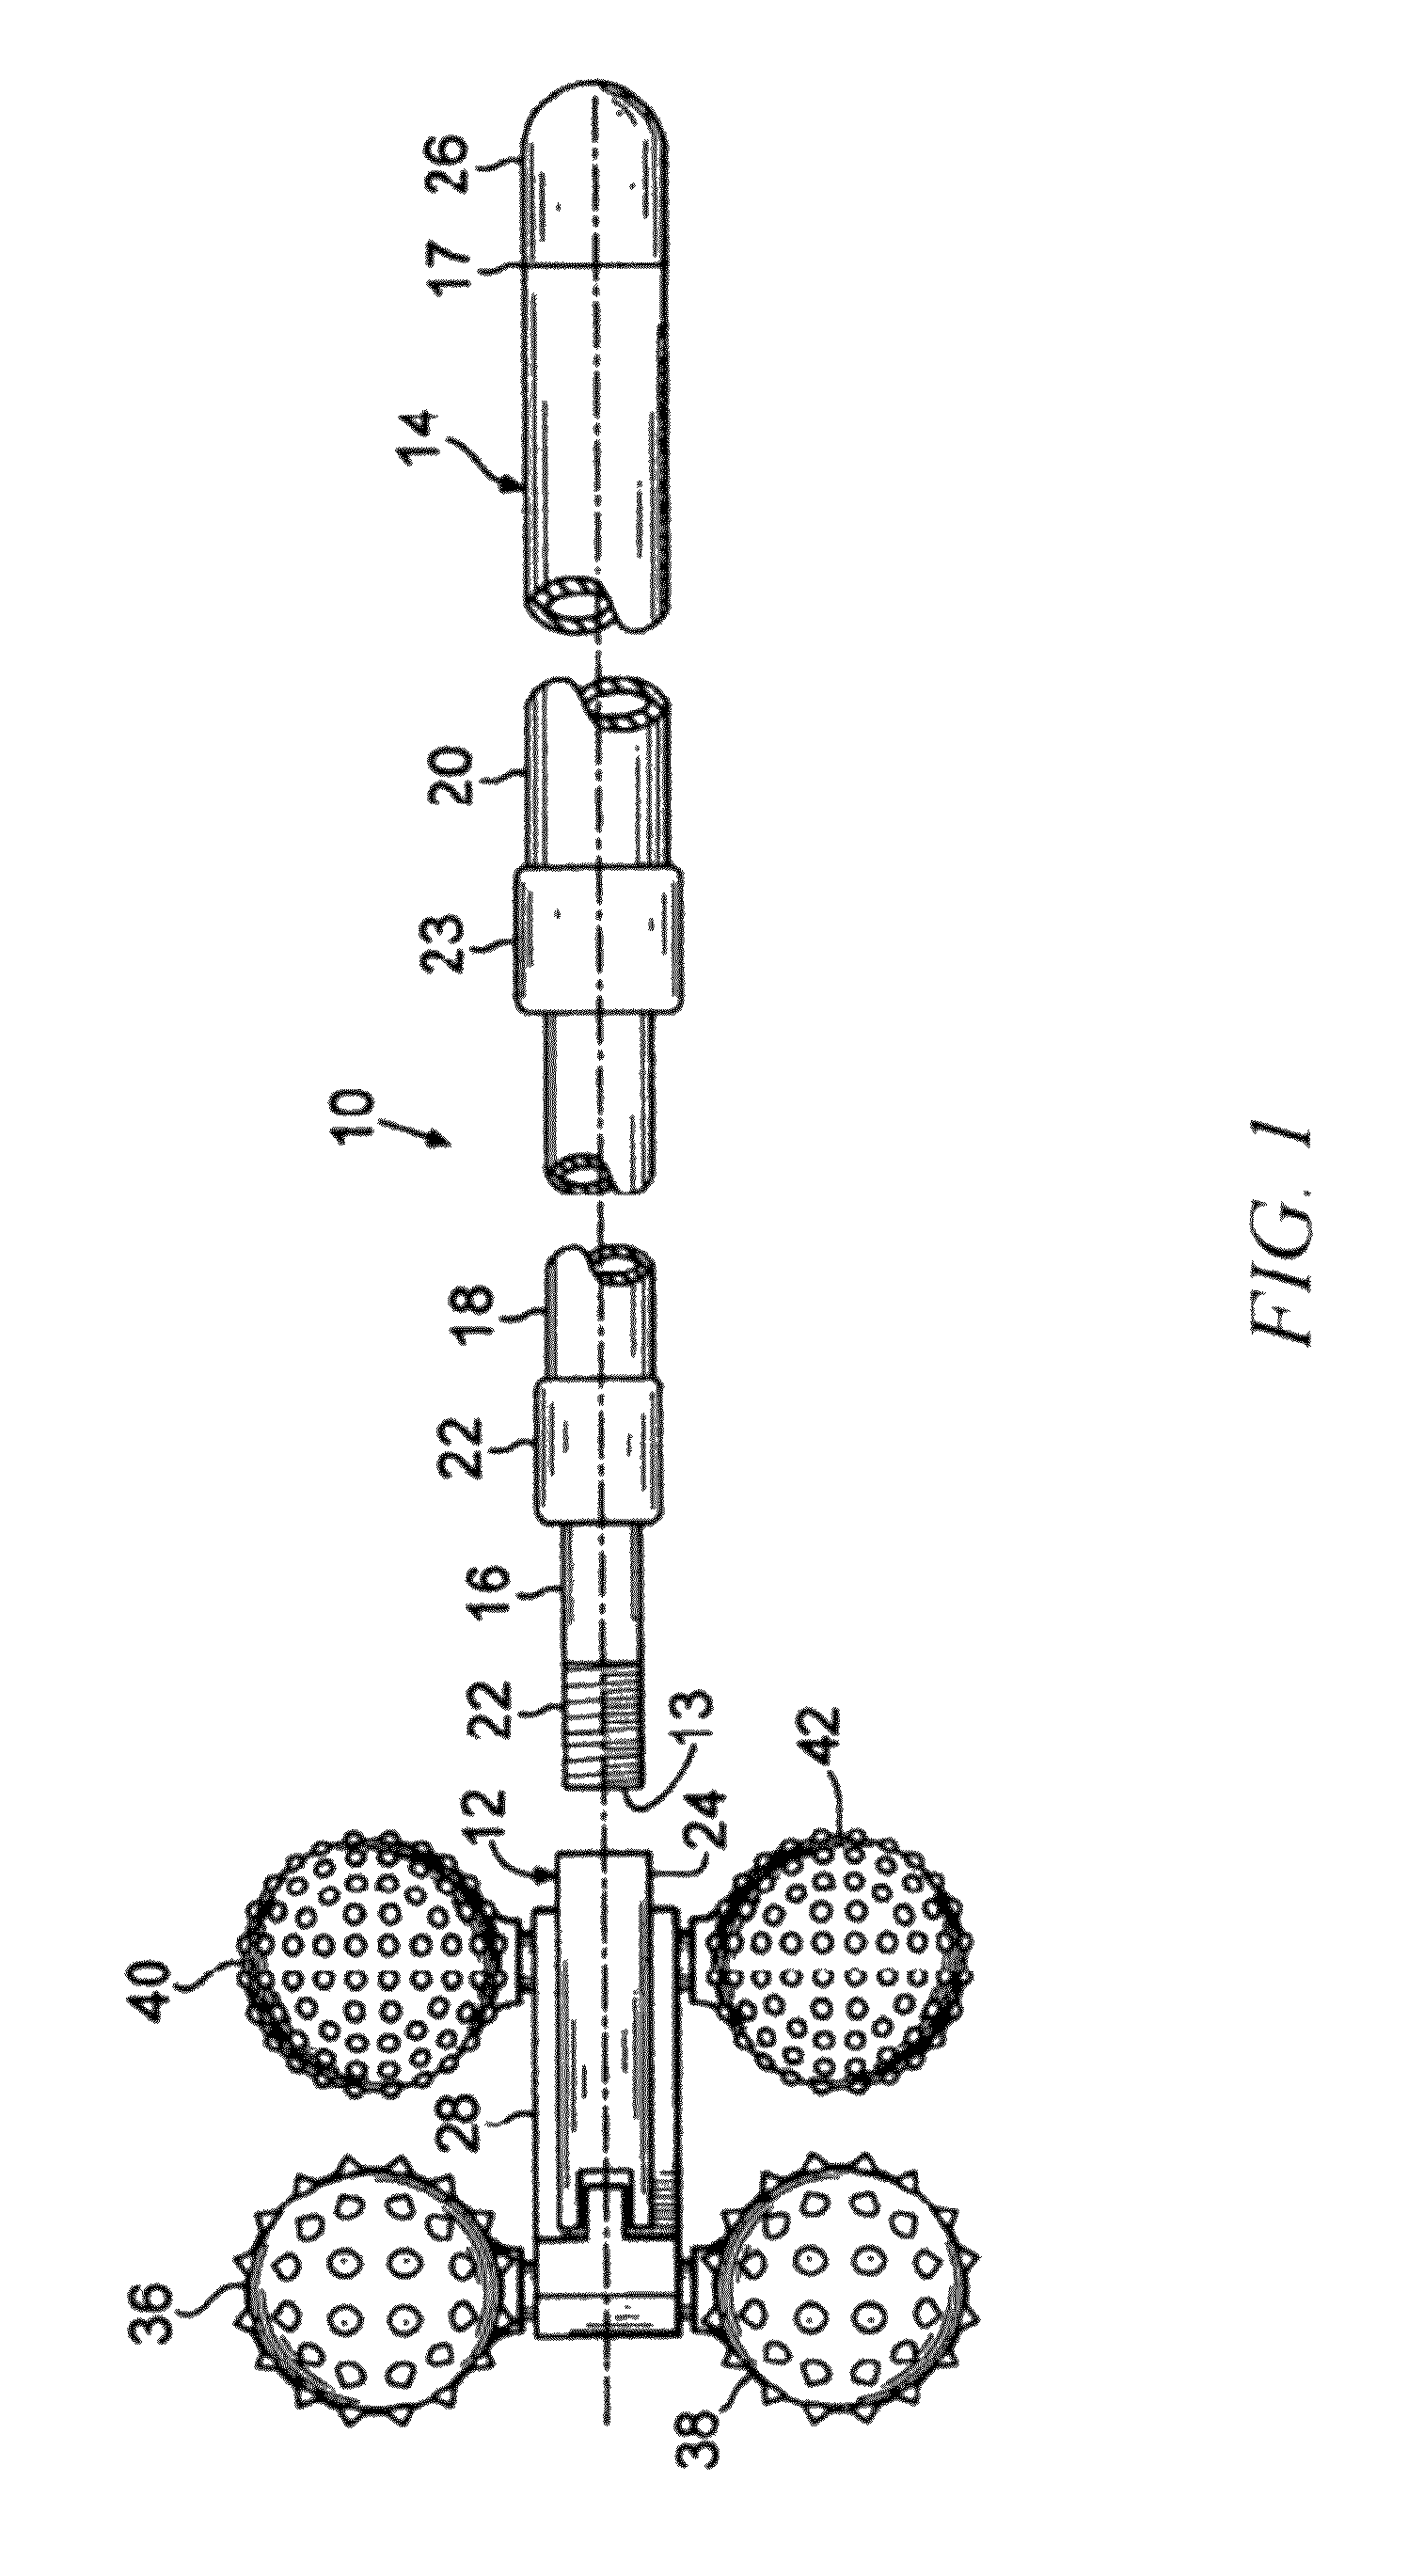 Method and apparatus for relieving leg cramps and massaging muscles